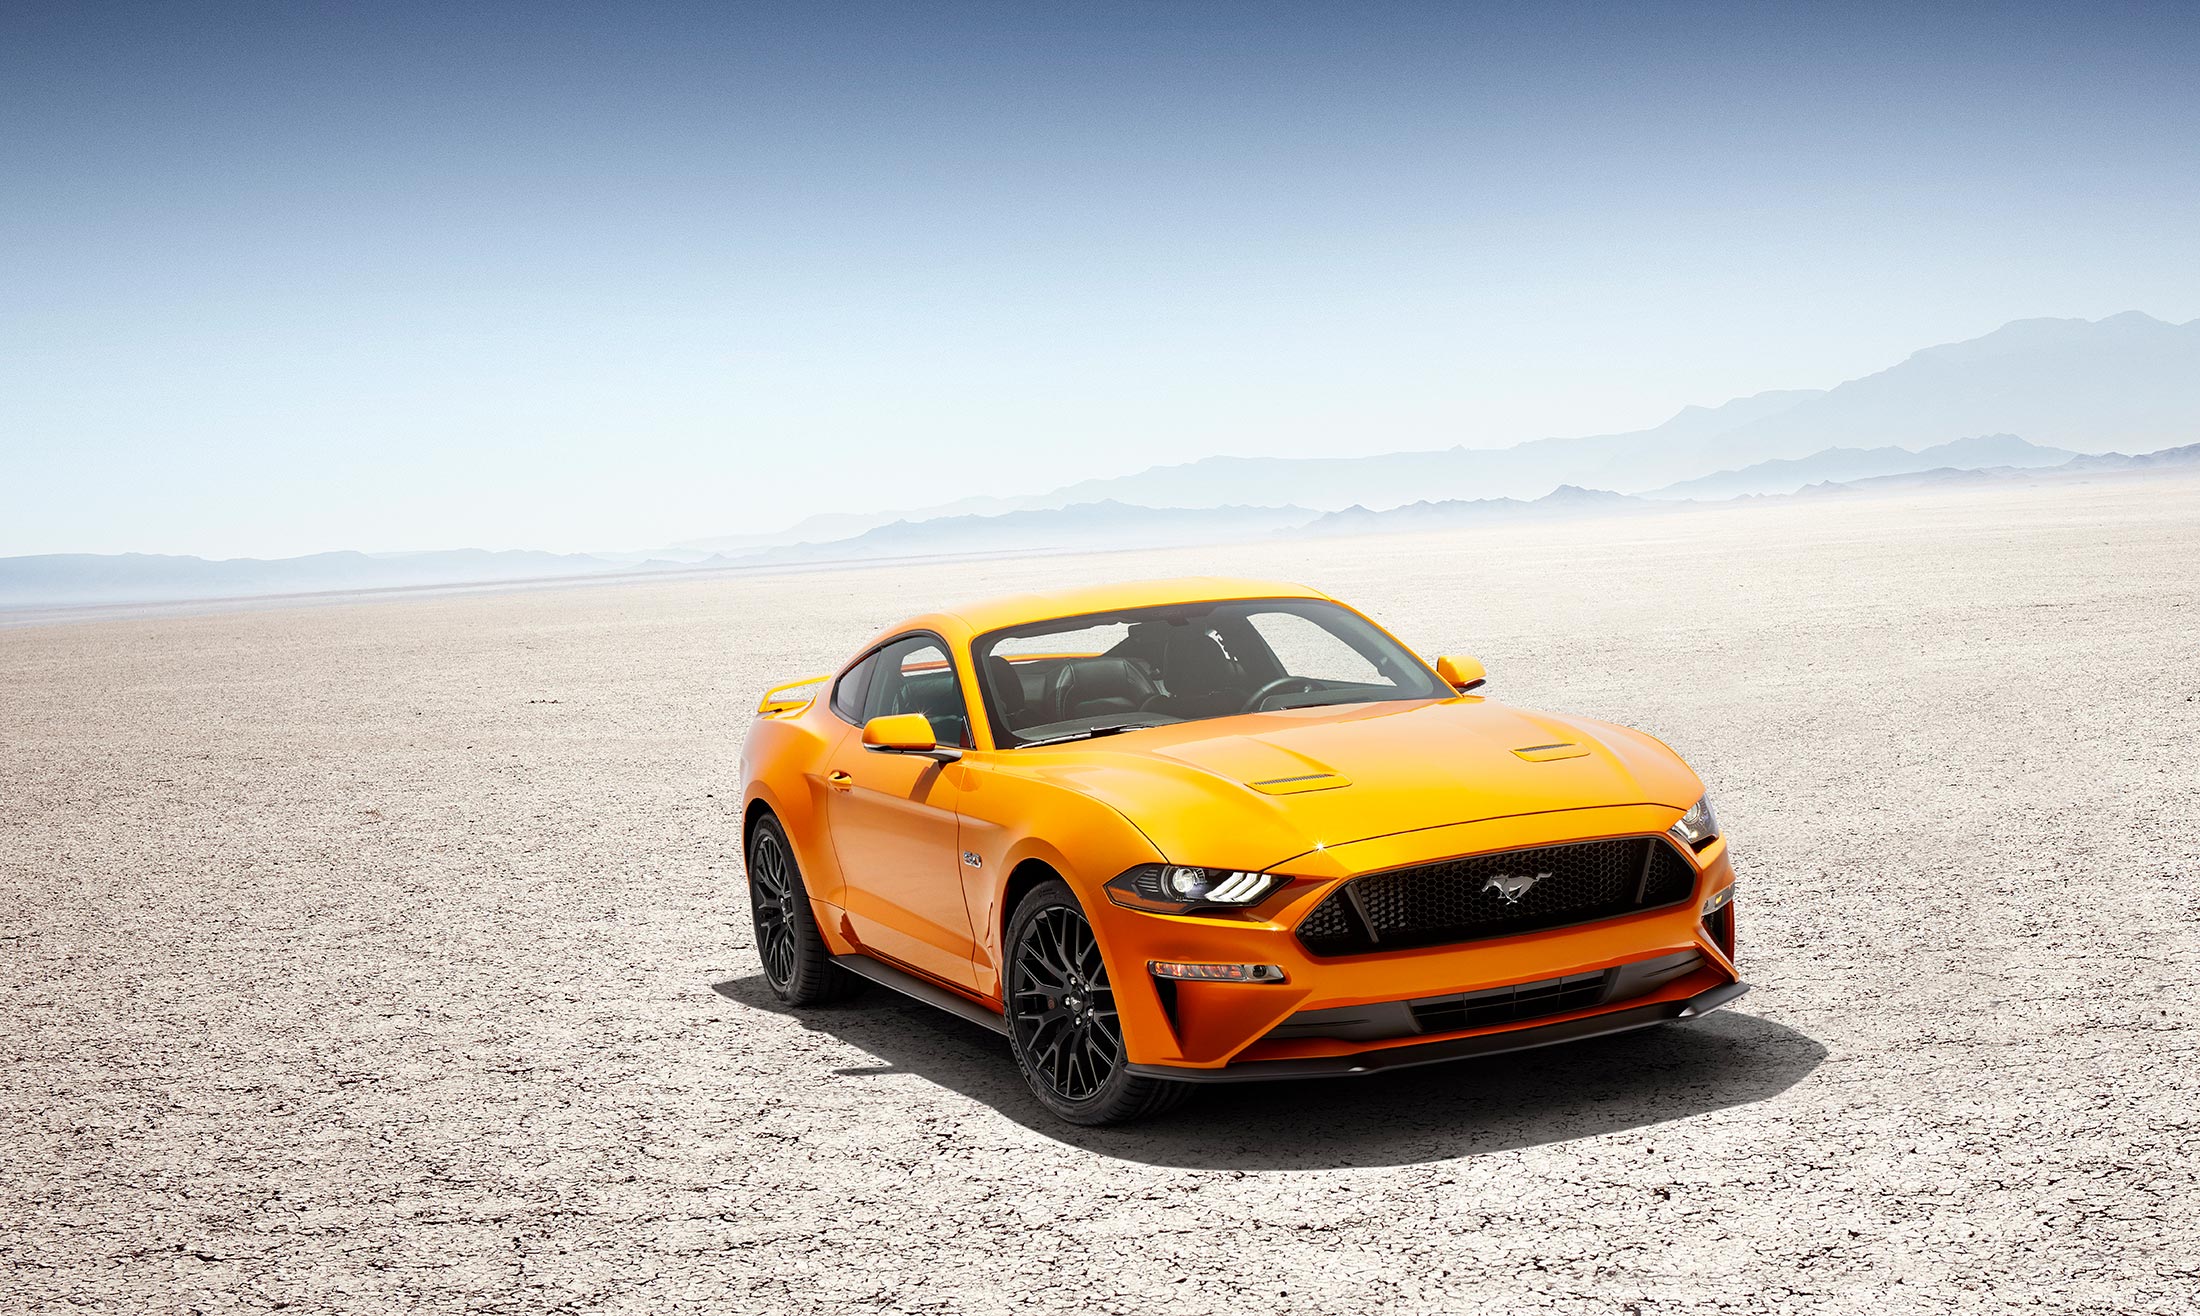 The 2018 Ford Mustang V8 GT
